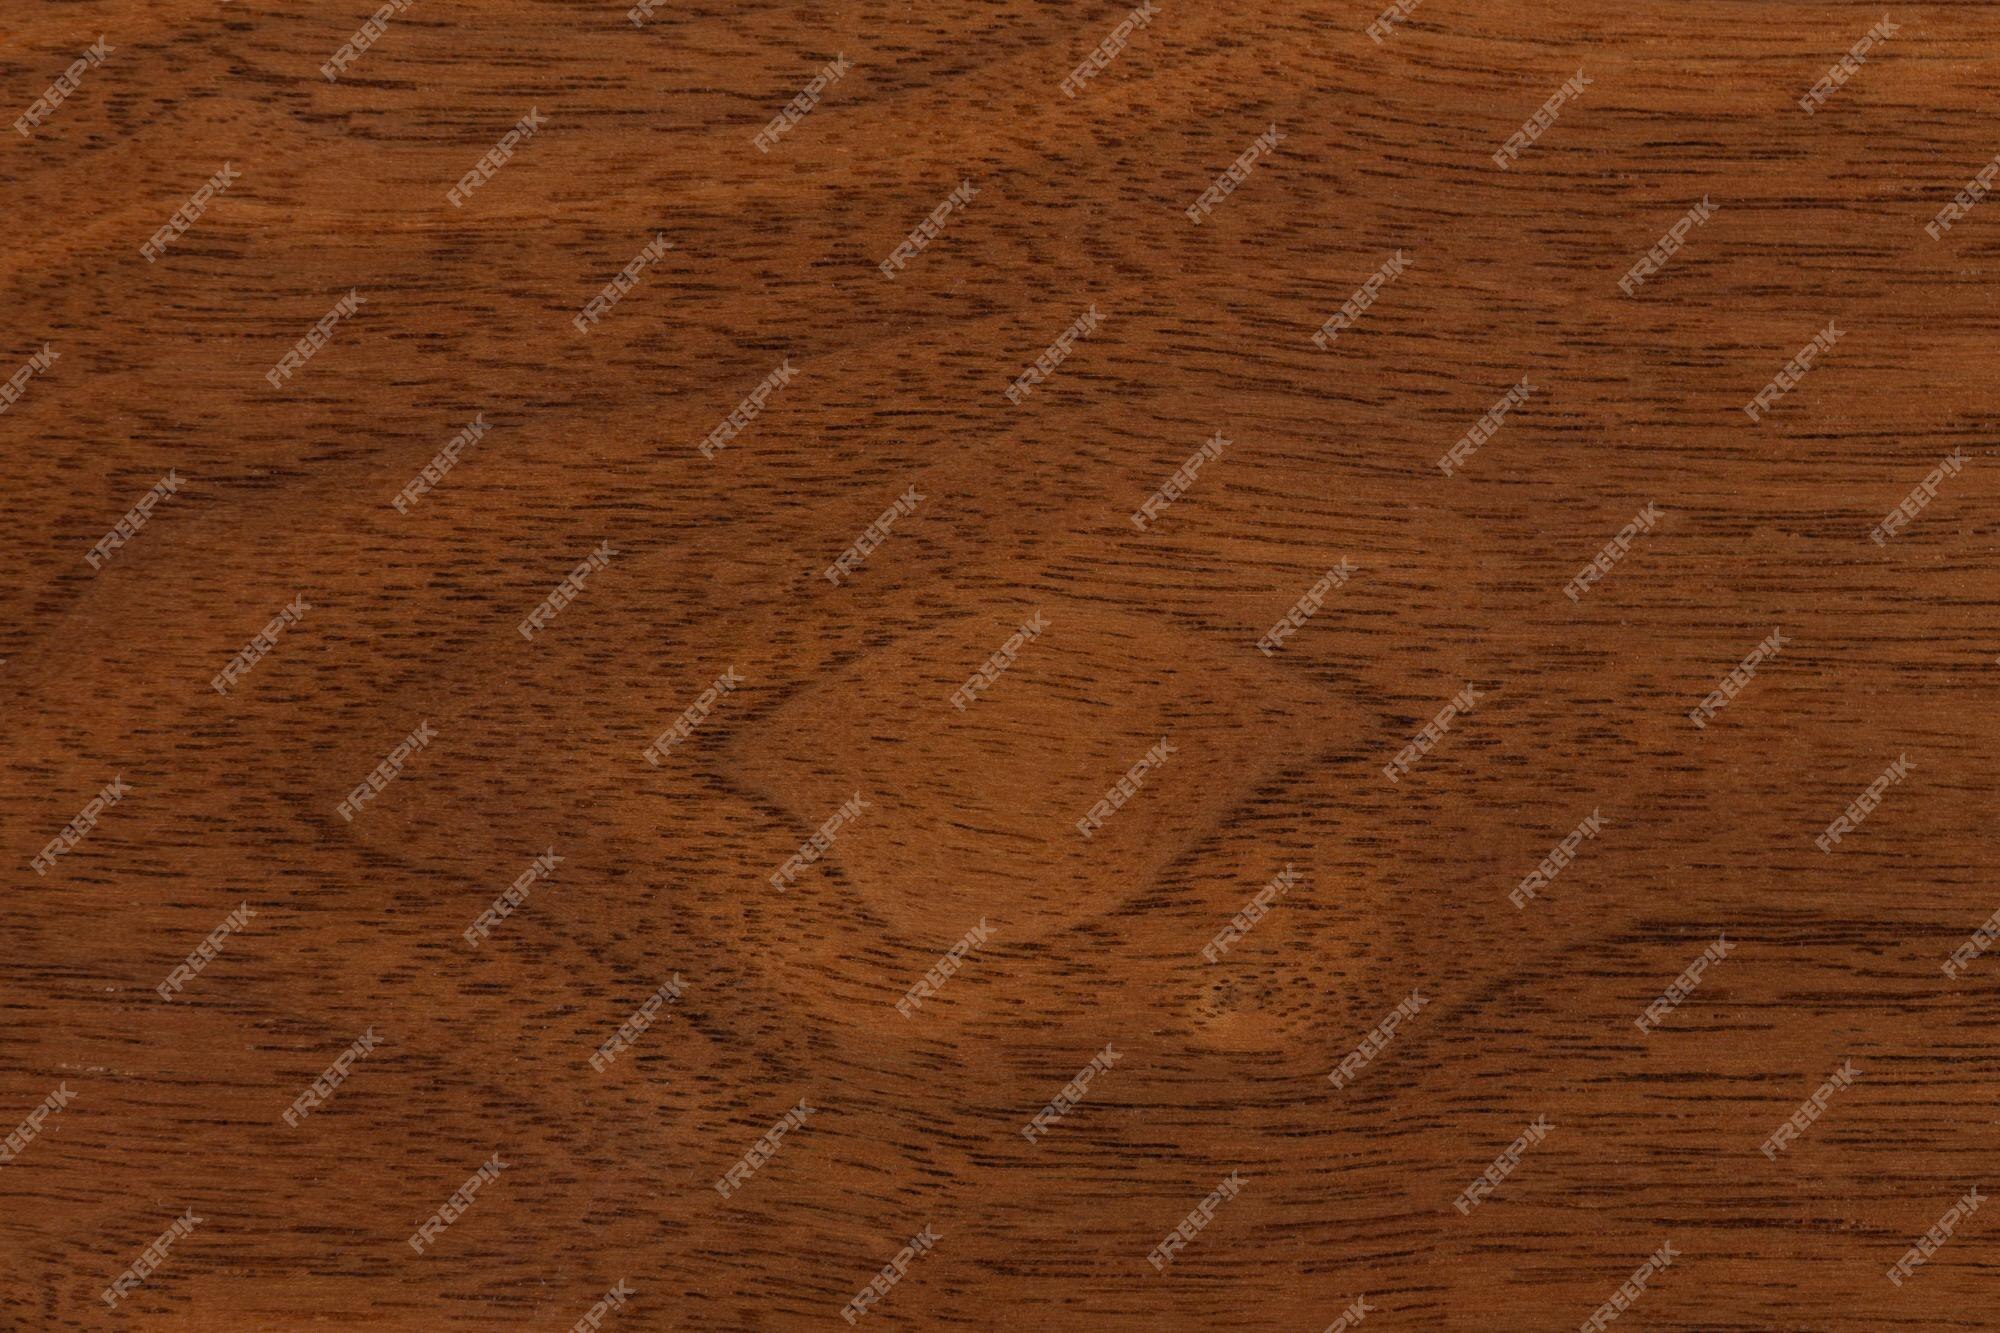 Premium Photo | Surface of teak wood background for design and decoration.  hi res photo.